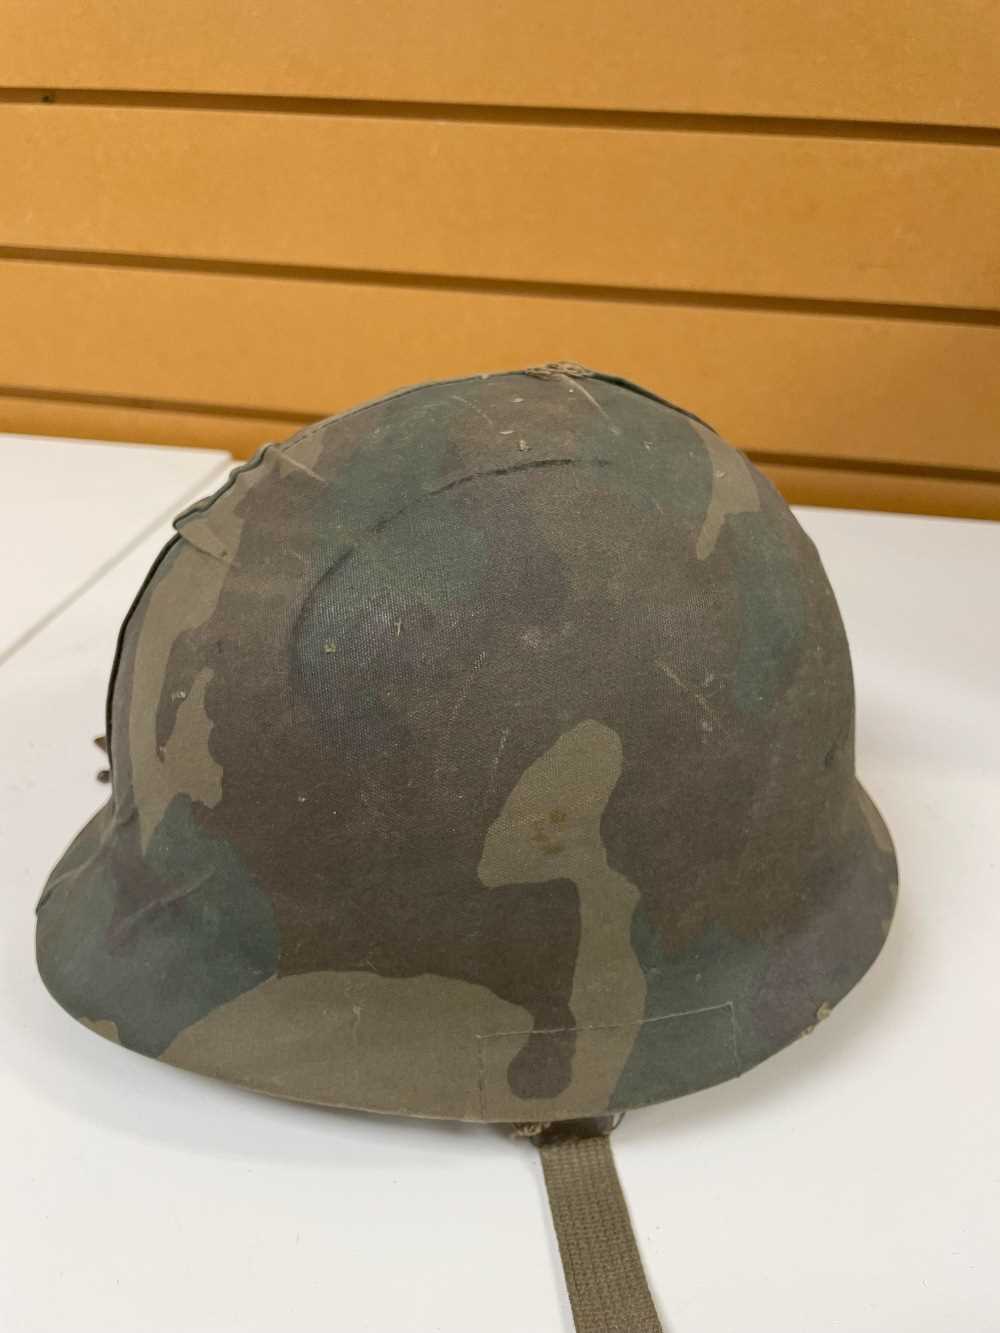 THE MILITARY CLUB HOUSE: A 1982 ARGENTINE INFANTRY HELMET FROM THE FALKLANDS CONFLICT with - Image 9 of 10